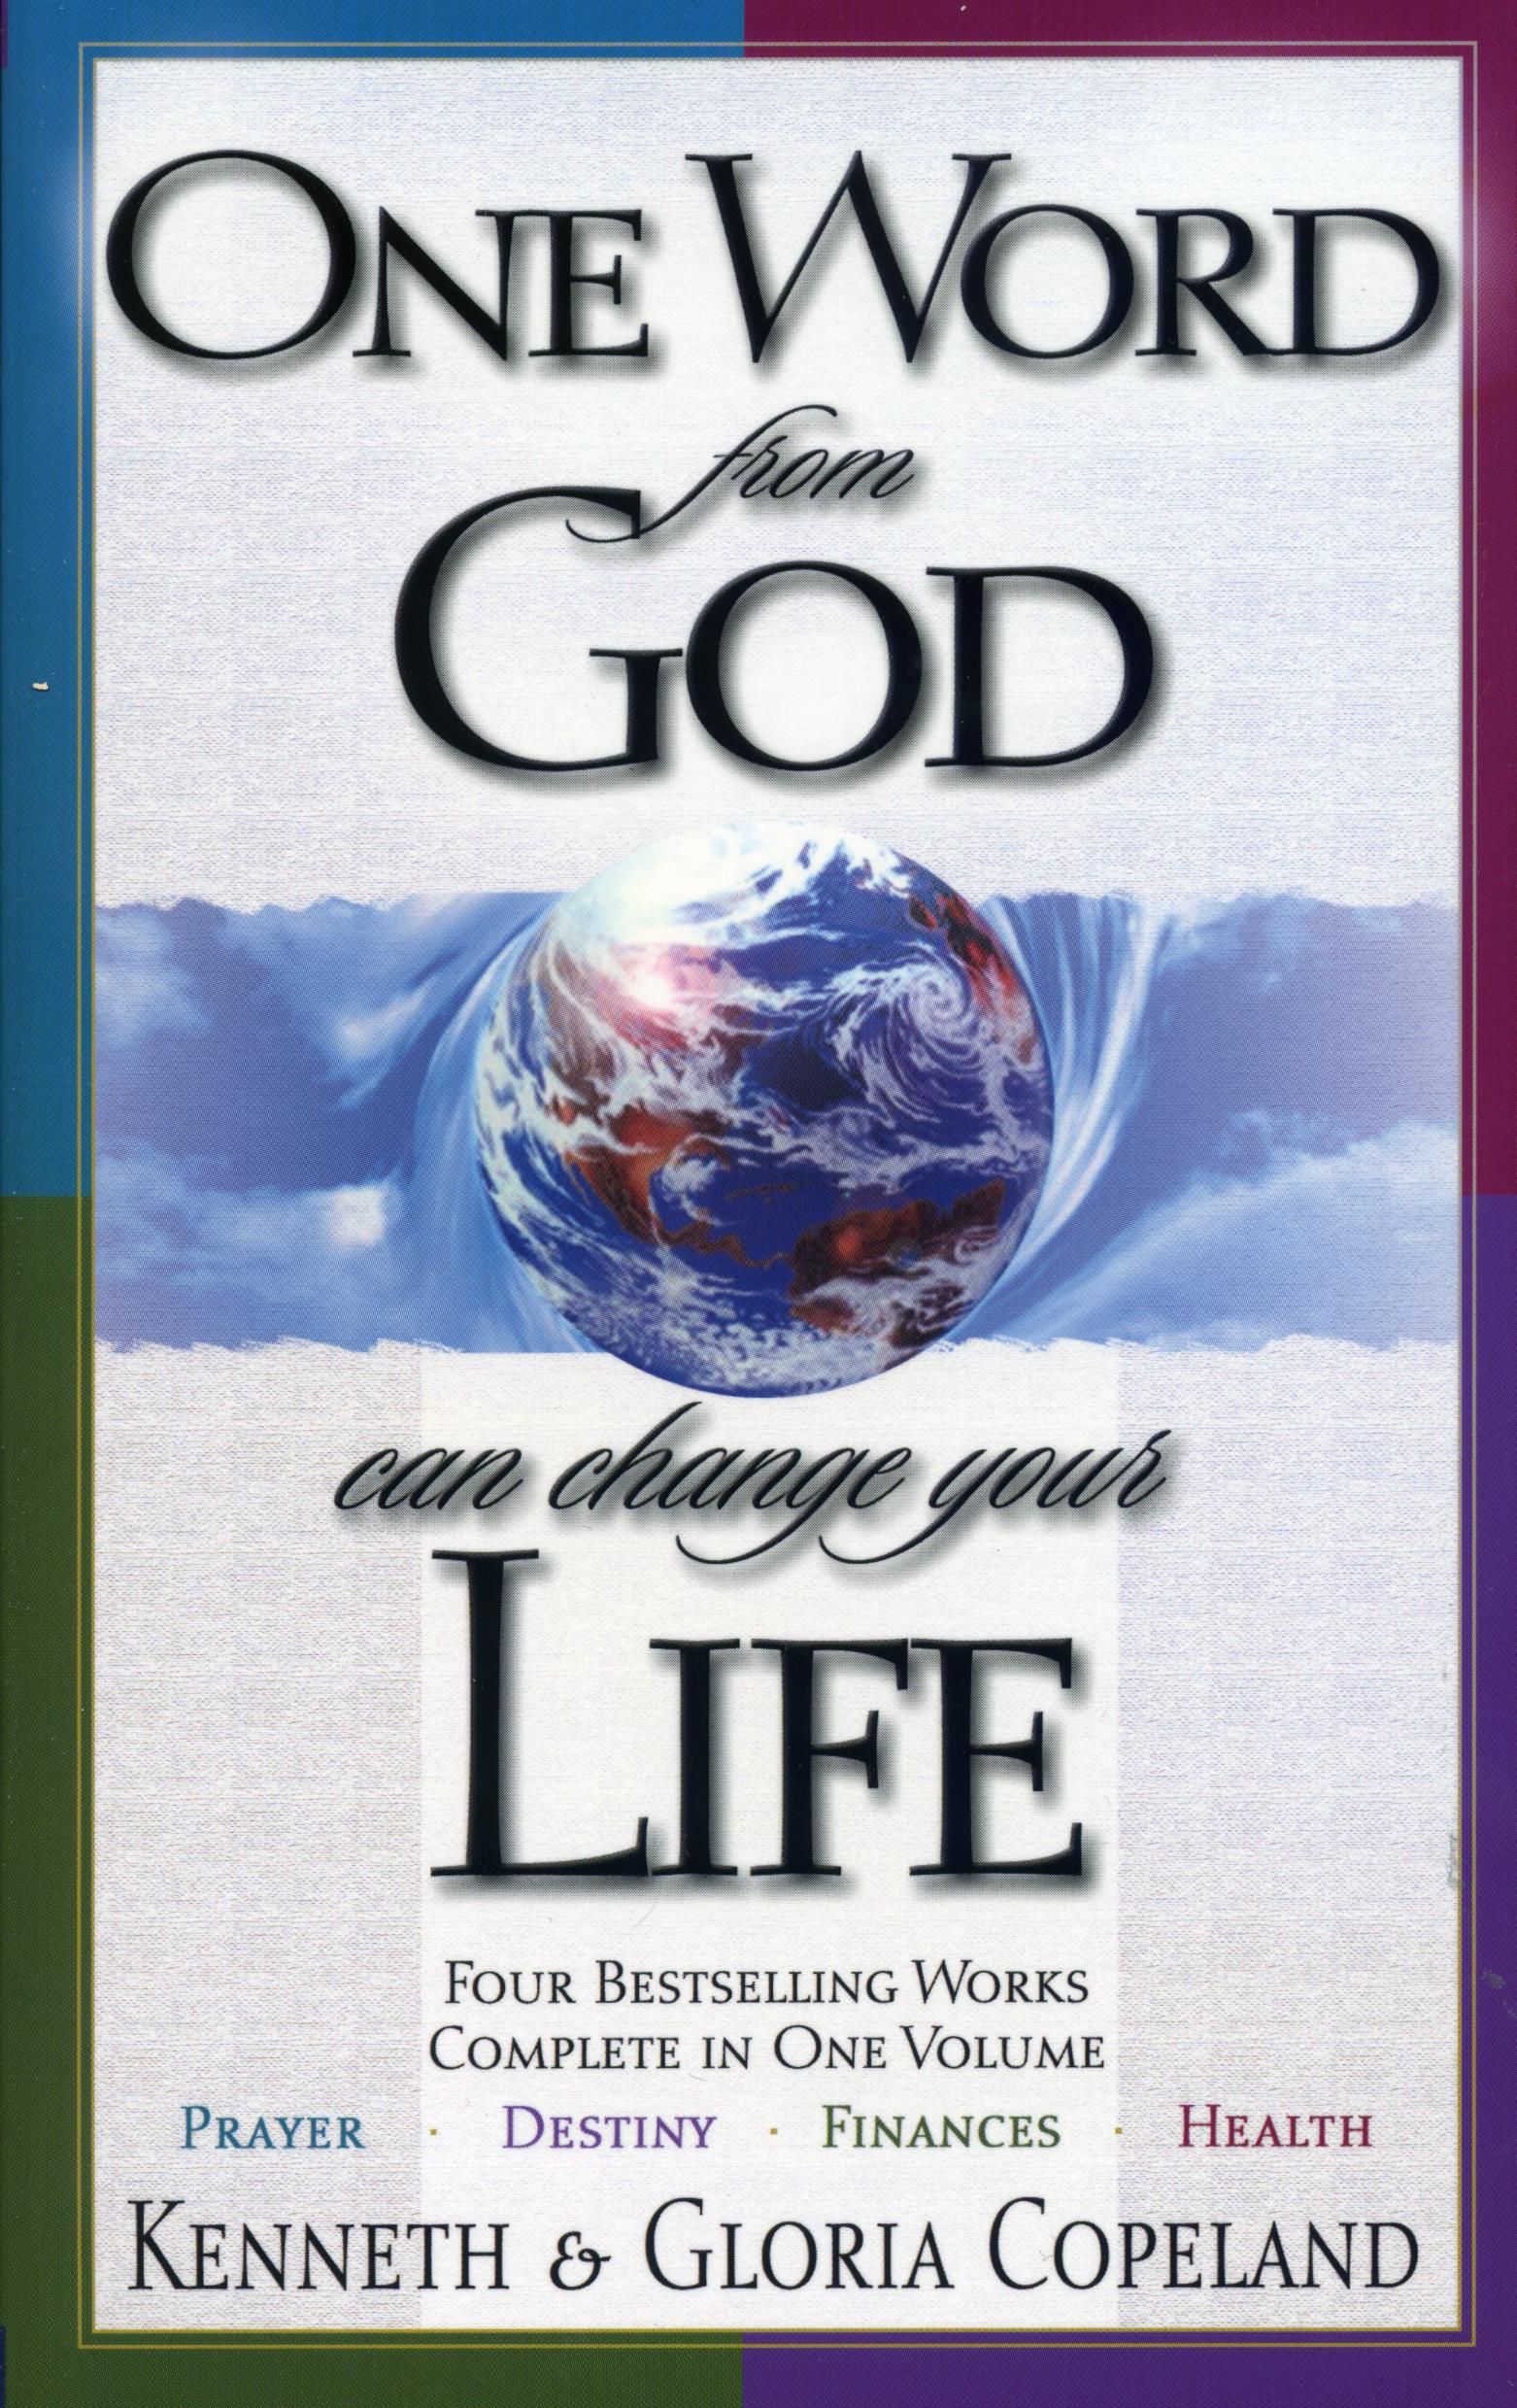 K. & G. Copeland: One Word from God can change your Life